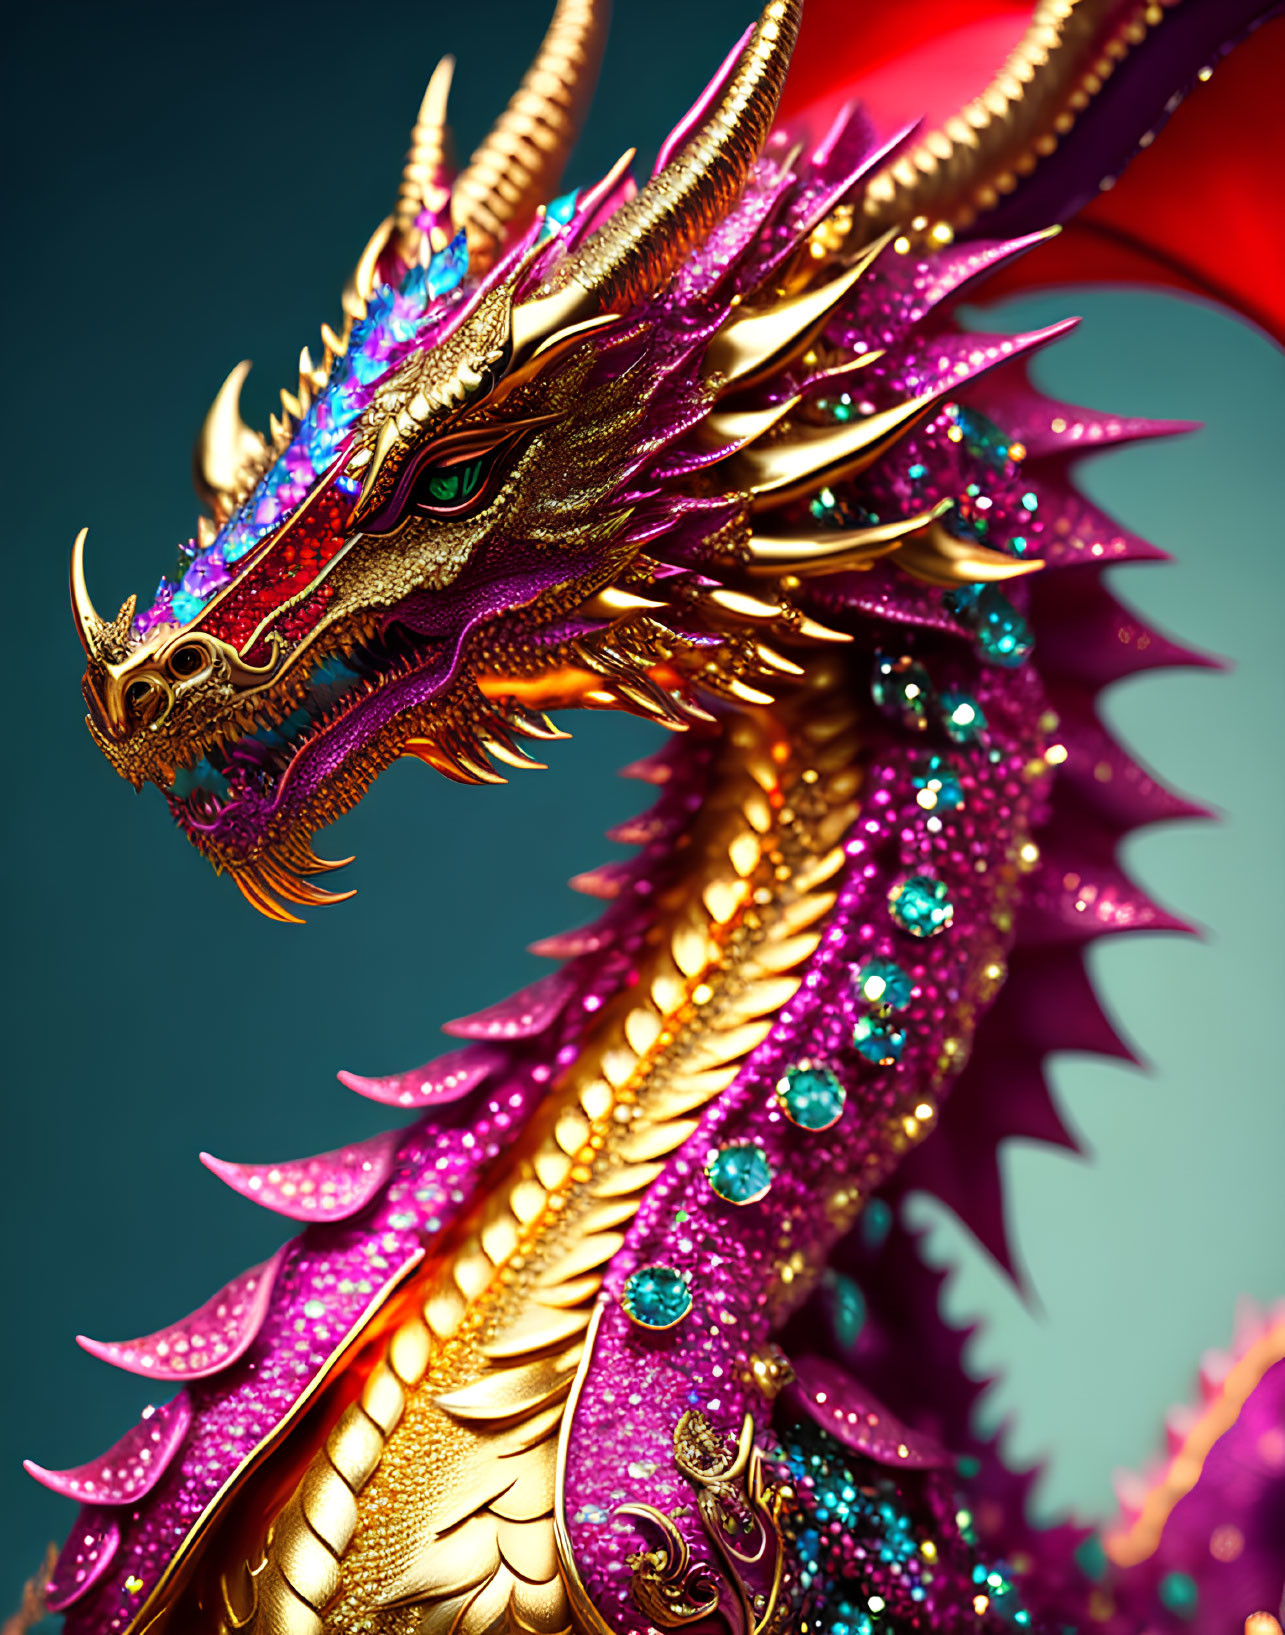 Dragon digital illustration with pink scales and green eyes on teal background